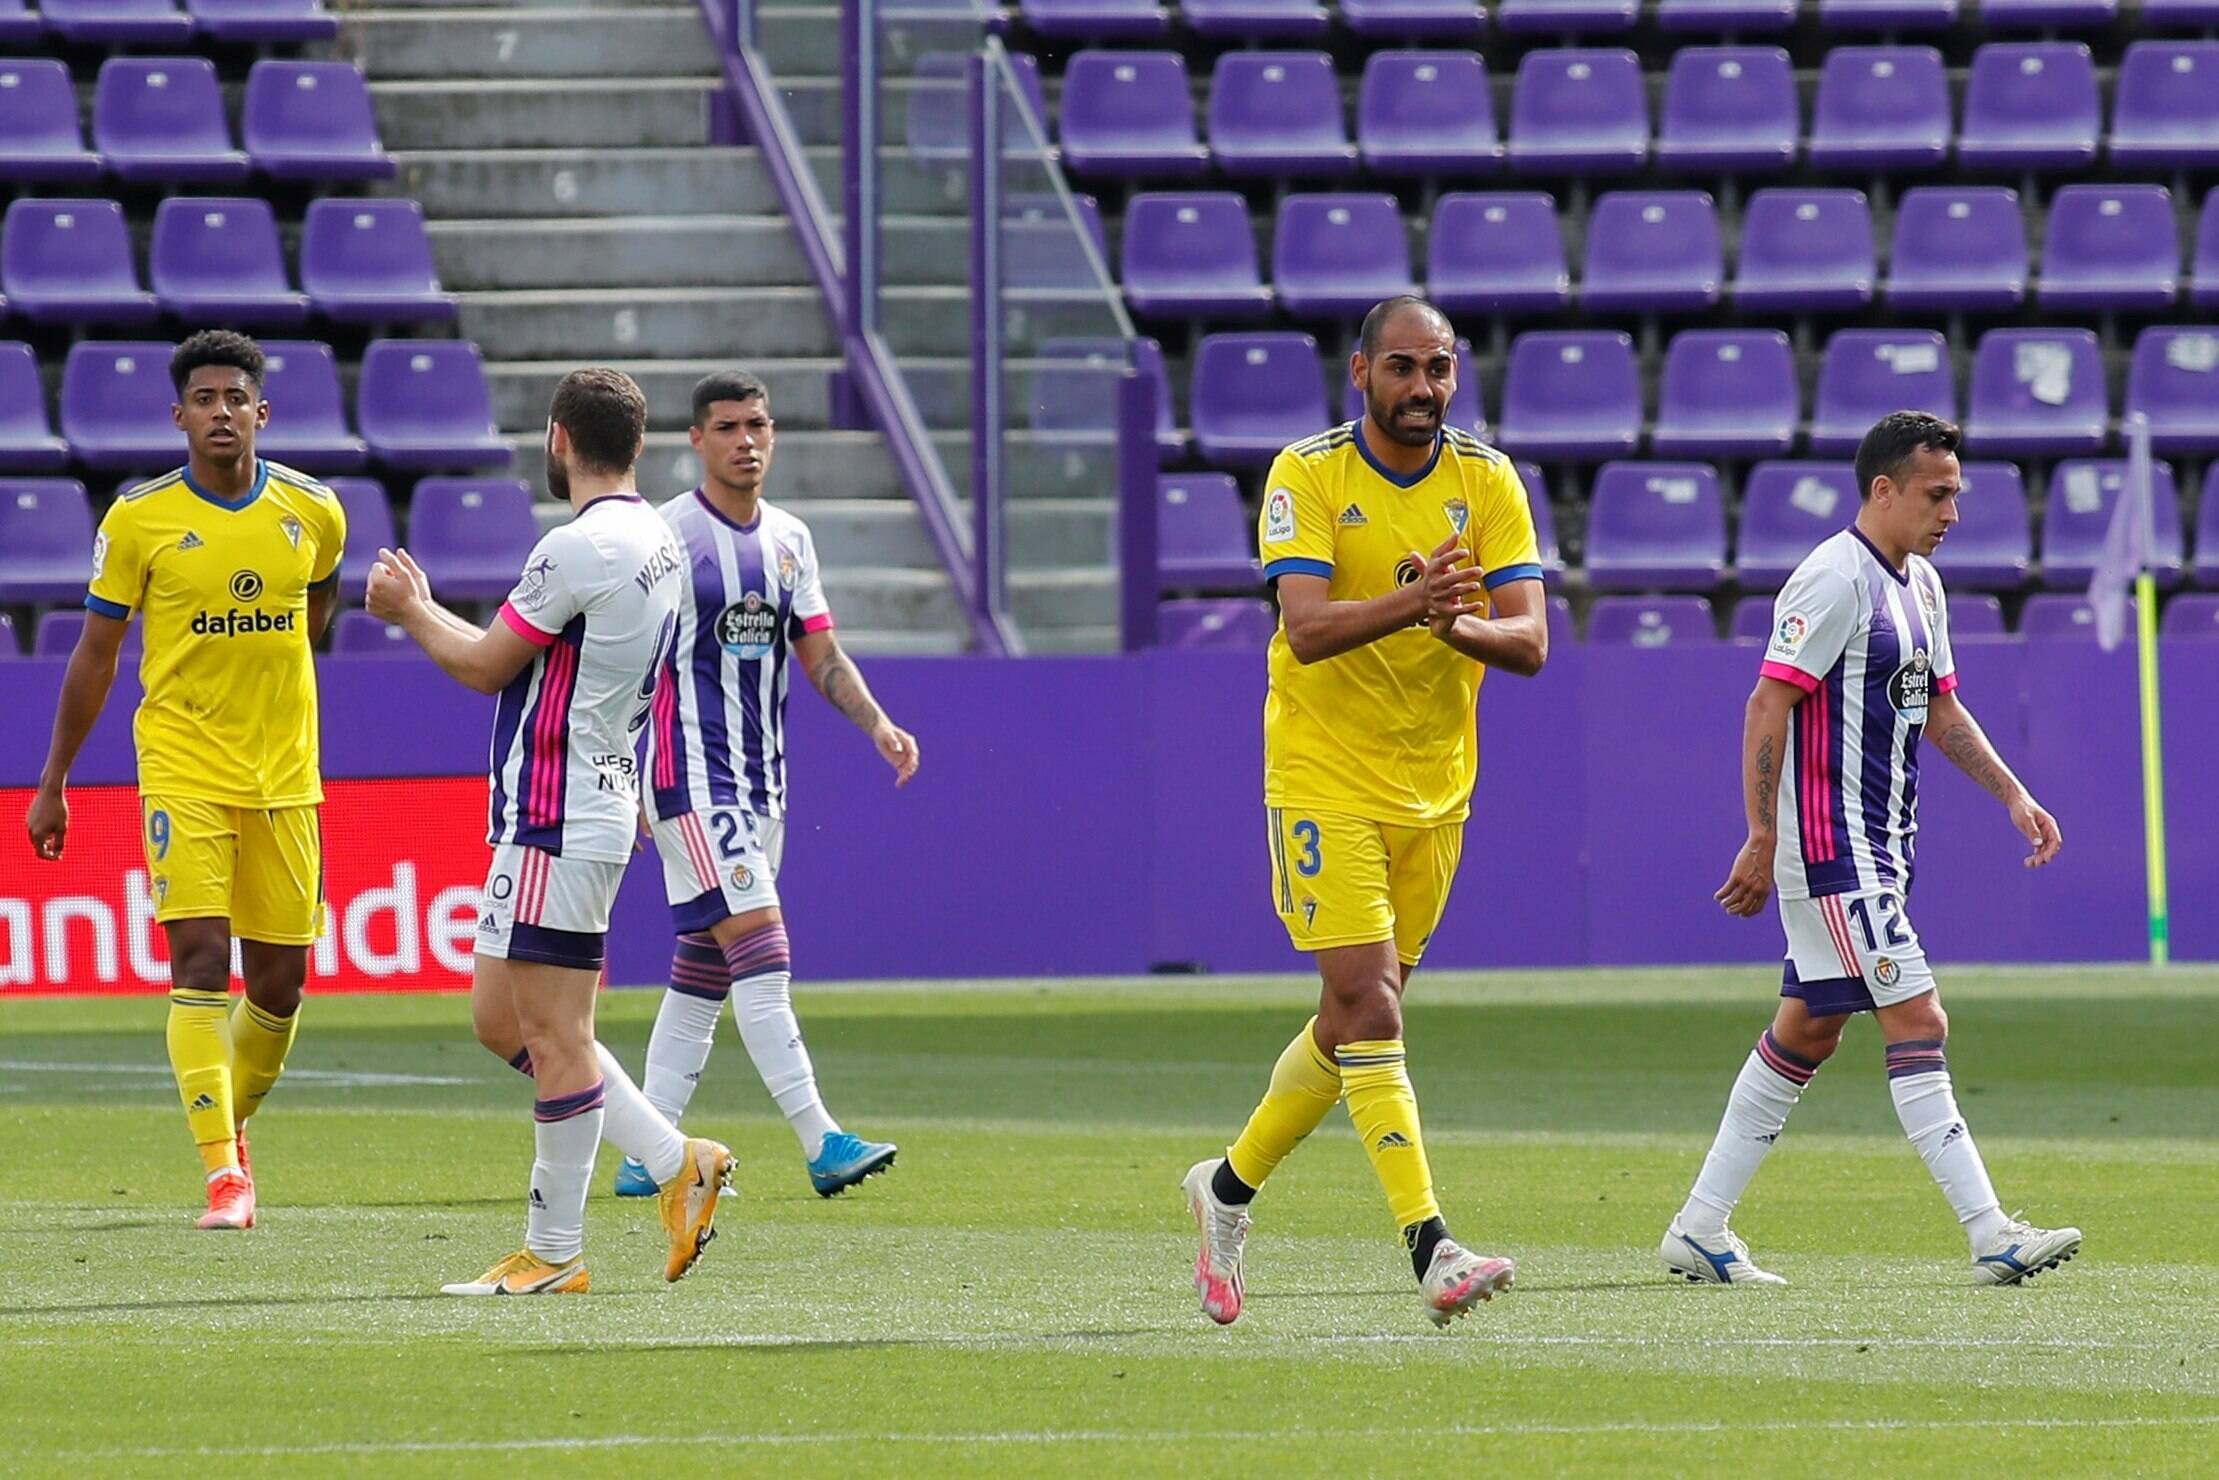 Cadiz S Defender Fali (2 R) Celebrate The 1 1 Tie During The Spanish Laliga Soccer Match Between Real Valladolid And Ca